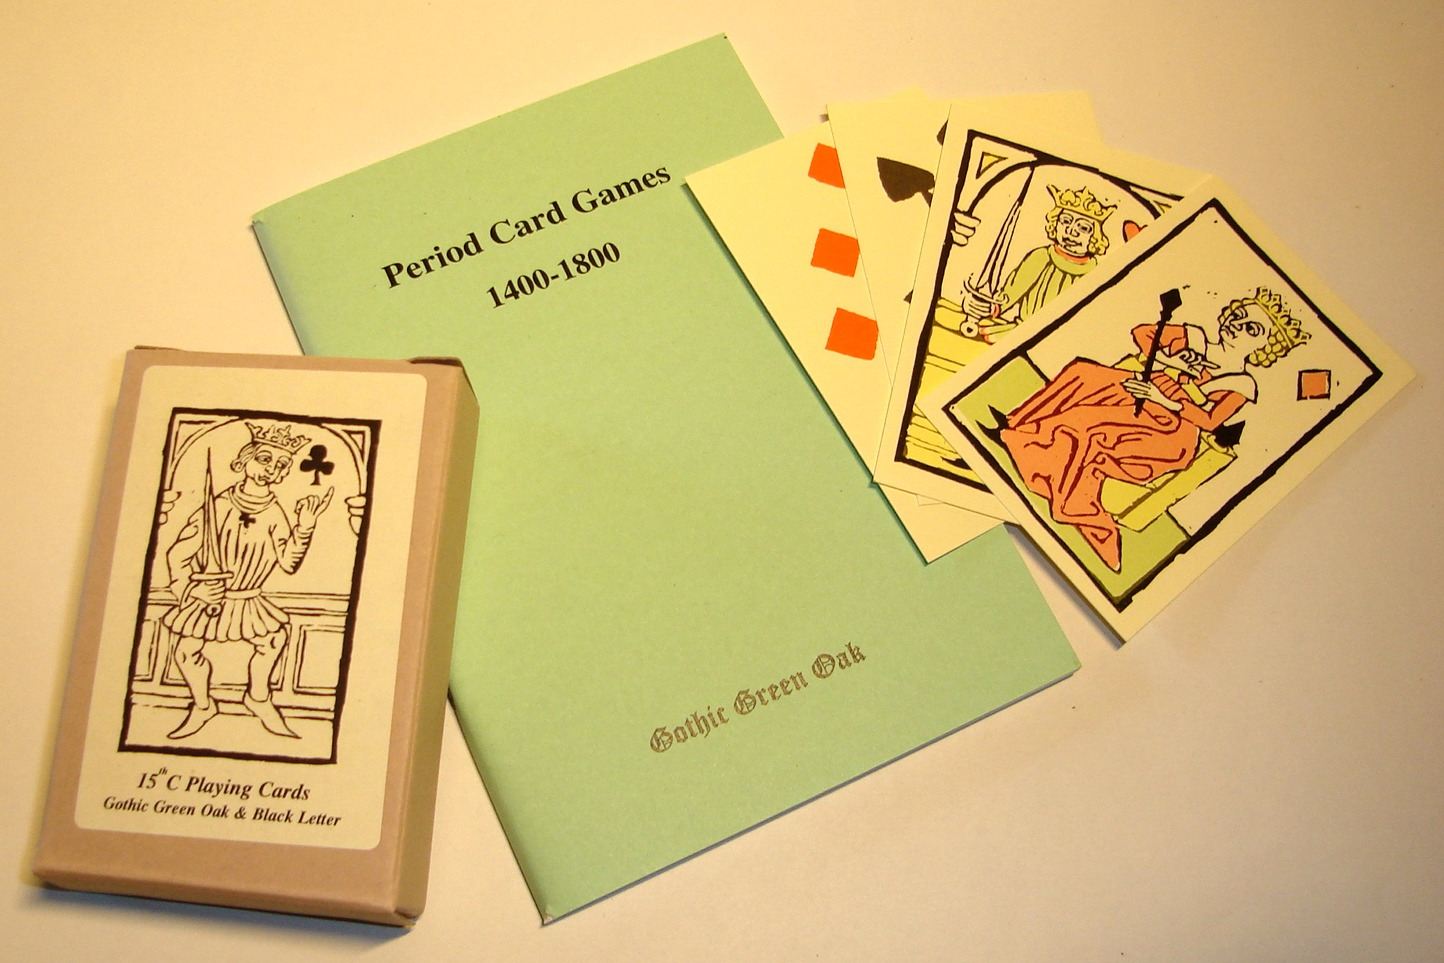 Reproduction C15th playing cards and rule book by Gothic Green Oak